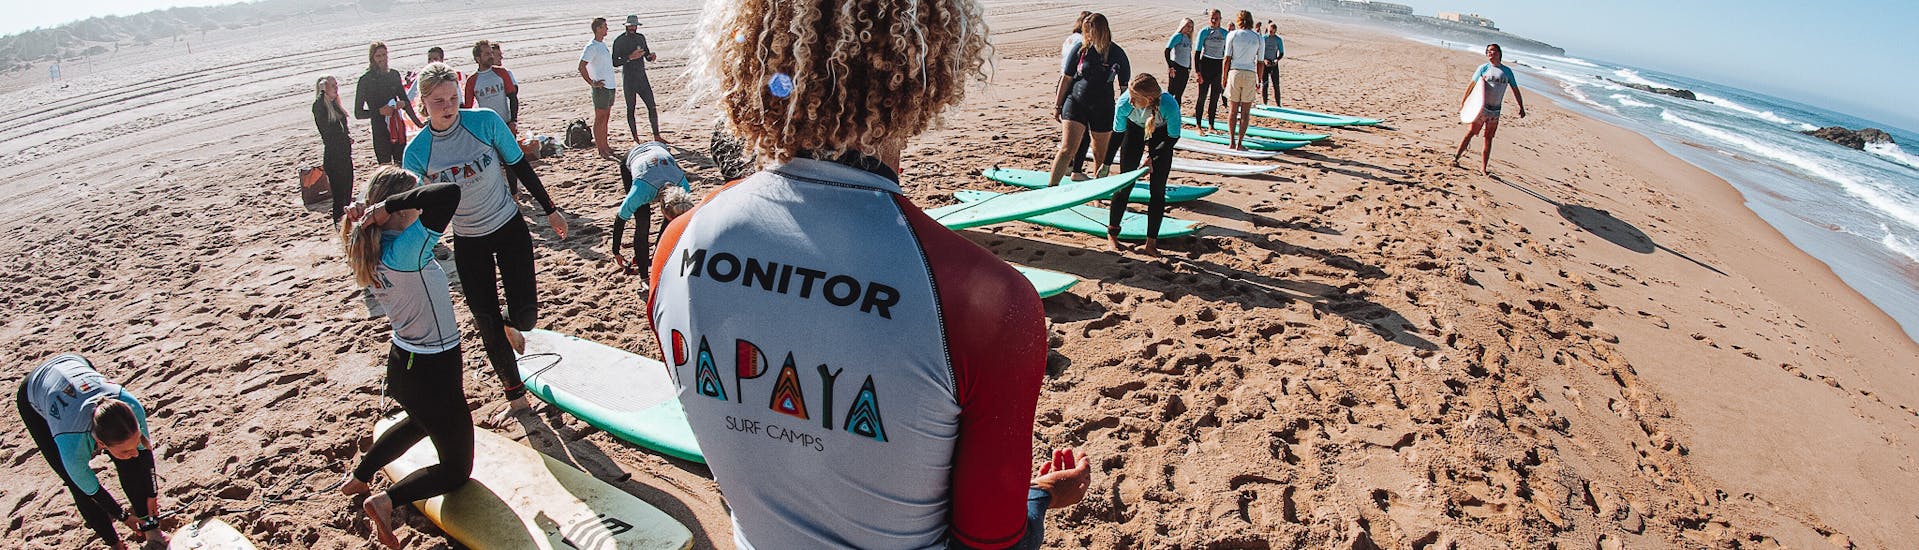 The instructor is monitoring the students during the Private Surf Lessons in Cascais near Lisbon with Papaya Surf Camp.